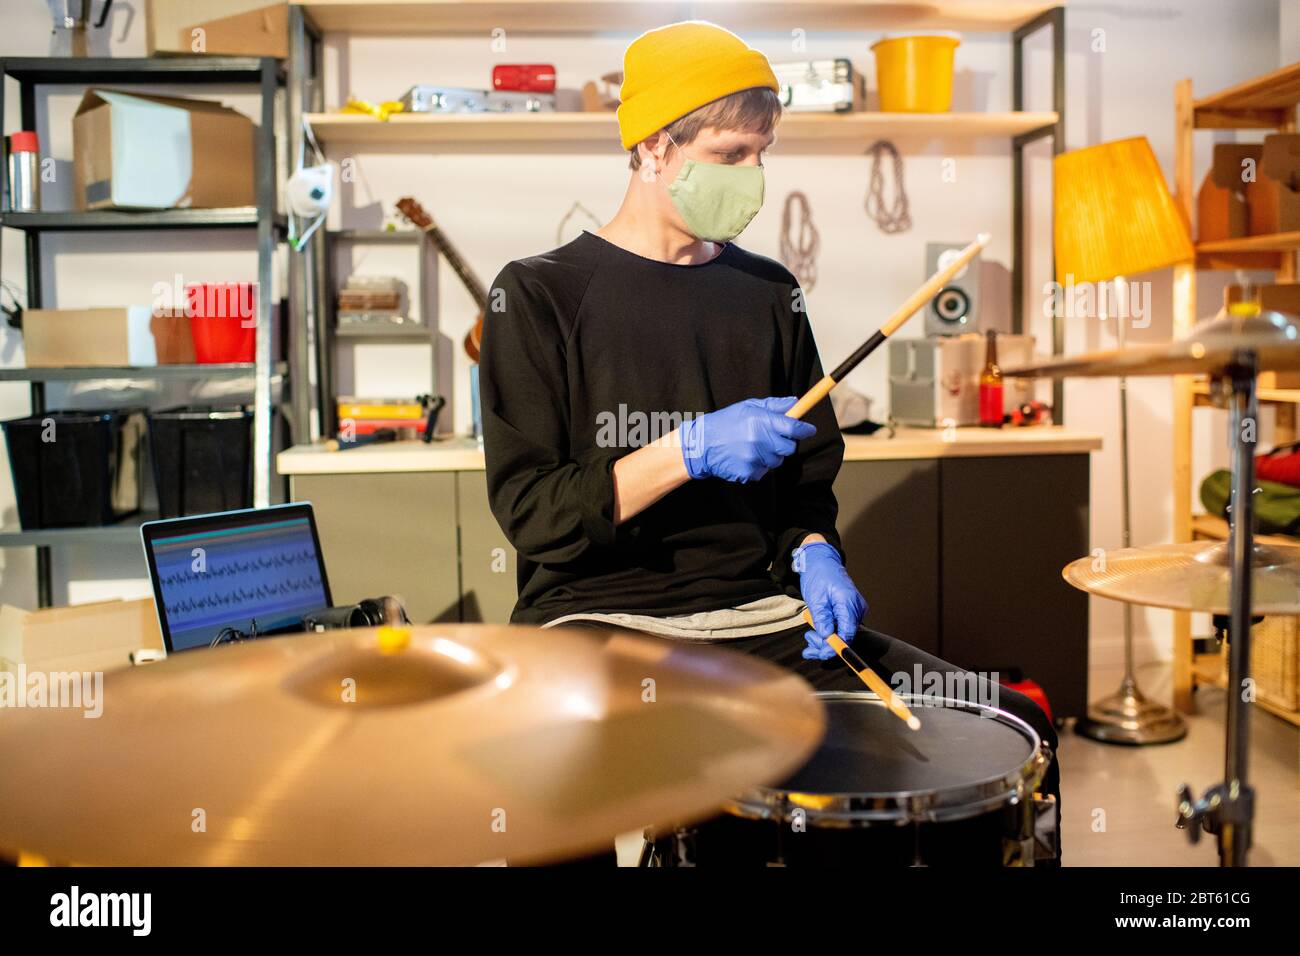 Young man in casualwear and protective mask and gloves hitting cymbals and drums while sitting in front of drumset and recording music Stock Photo